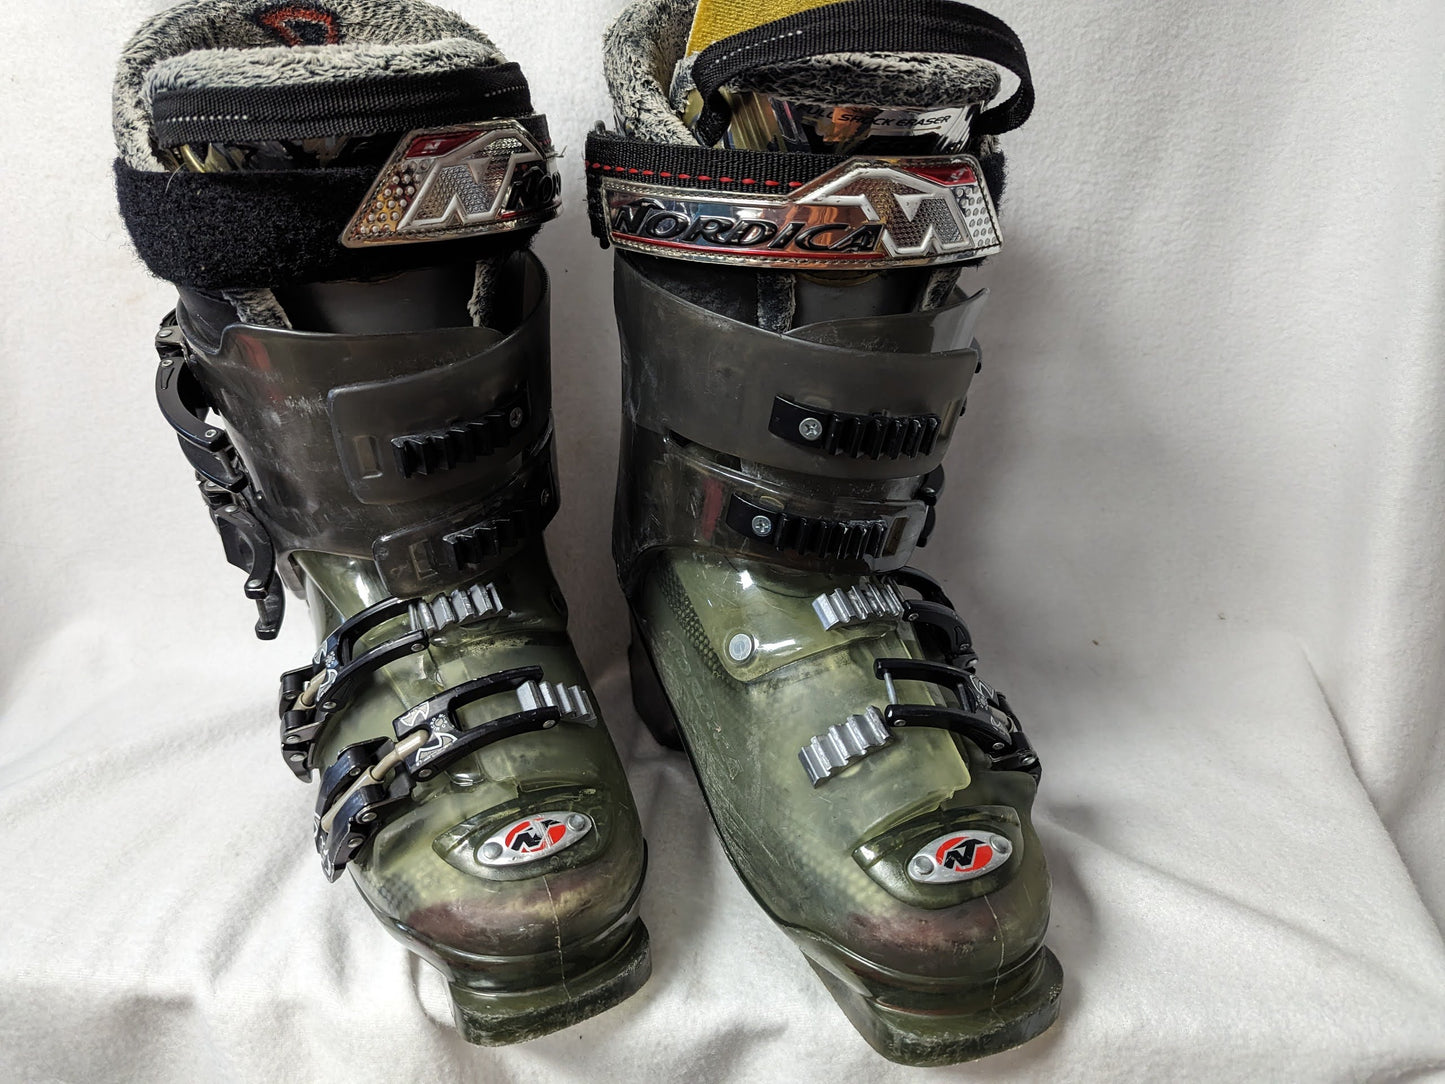 Nordica Super Charger Ski Boots Size 26.5 Color Green Condition Used